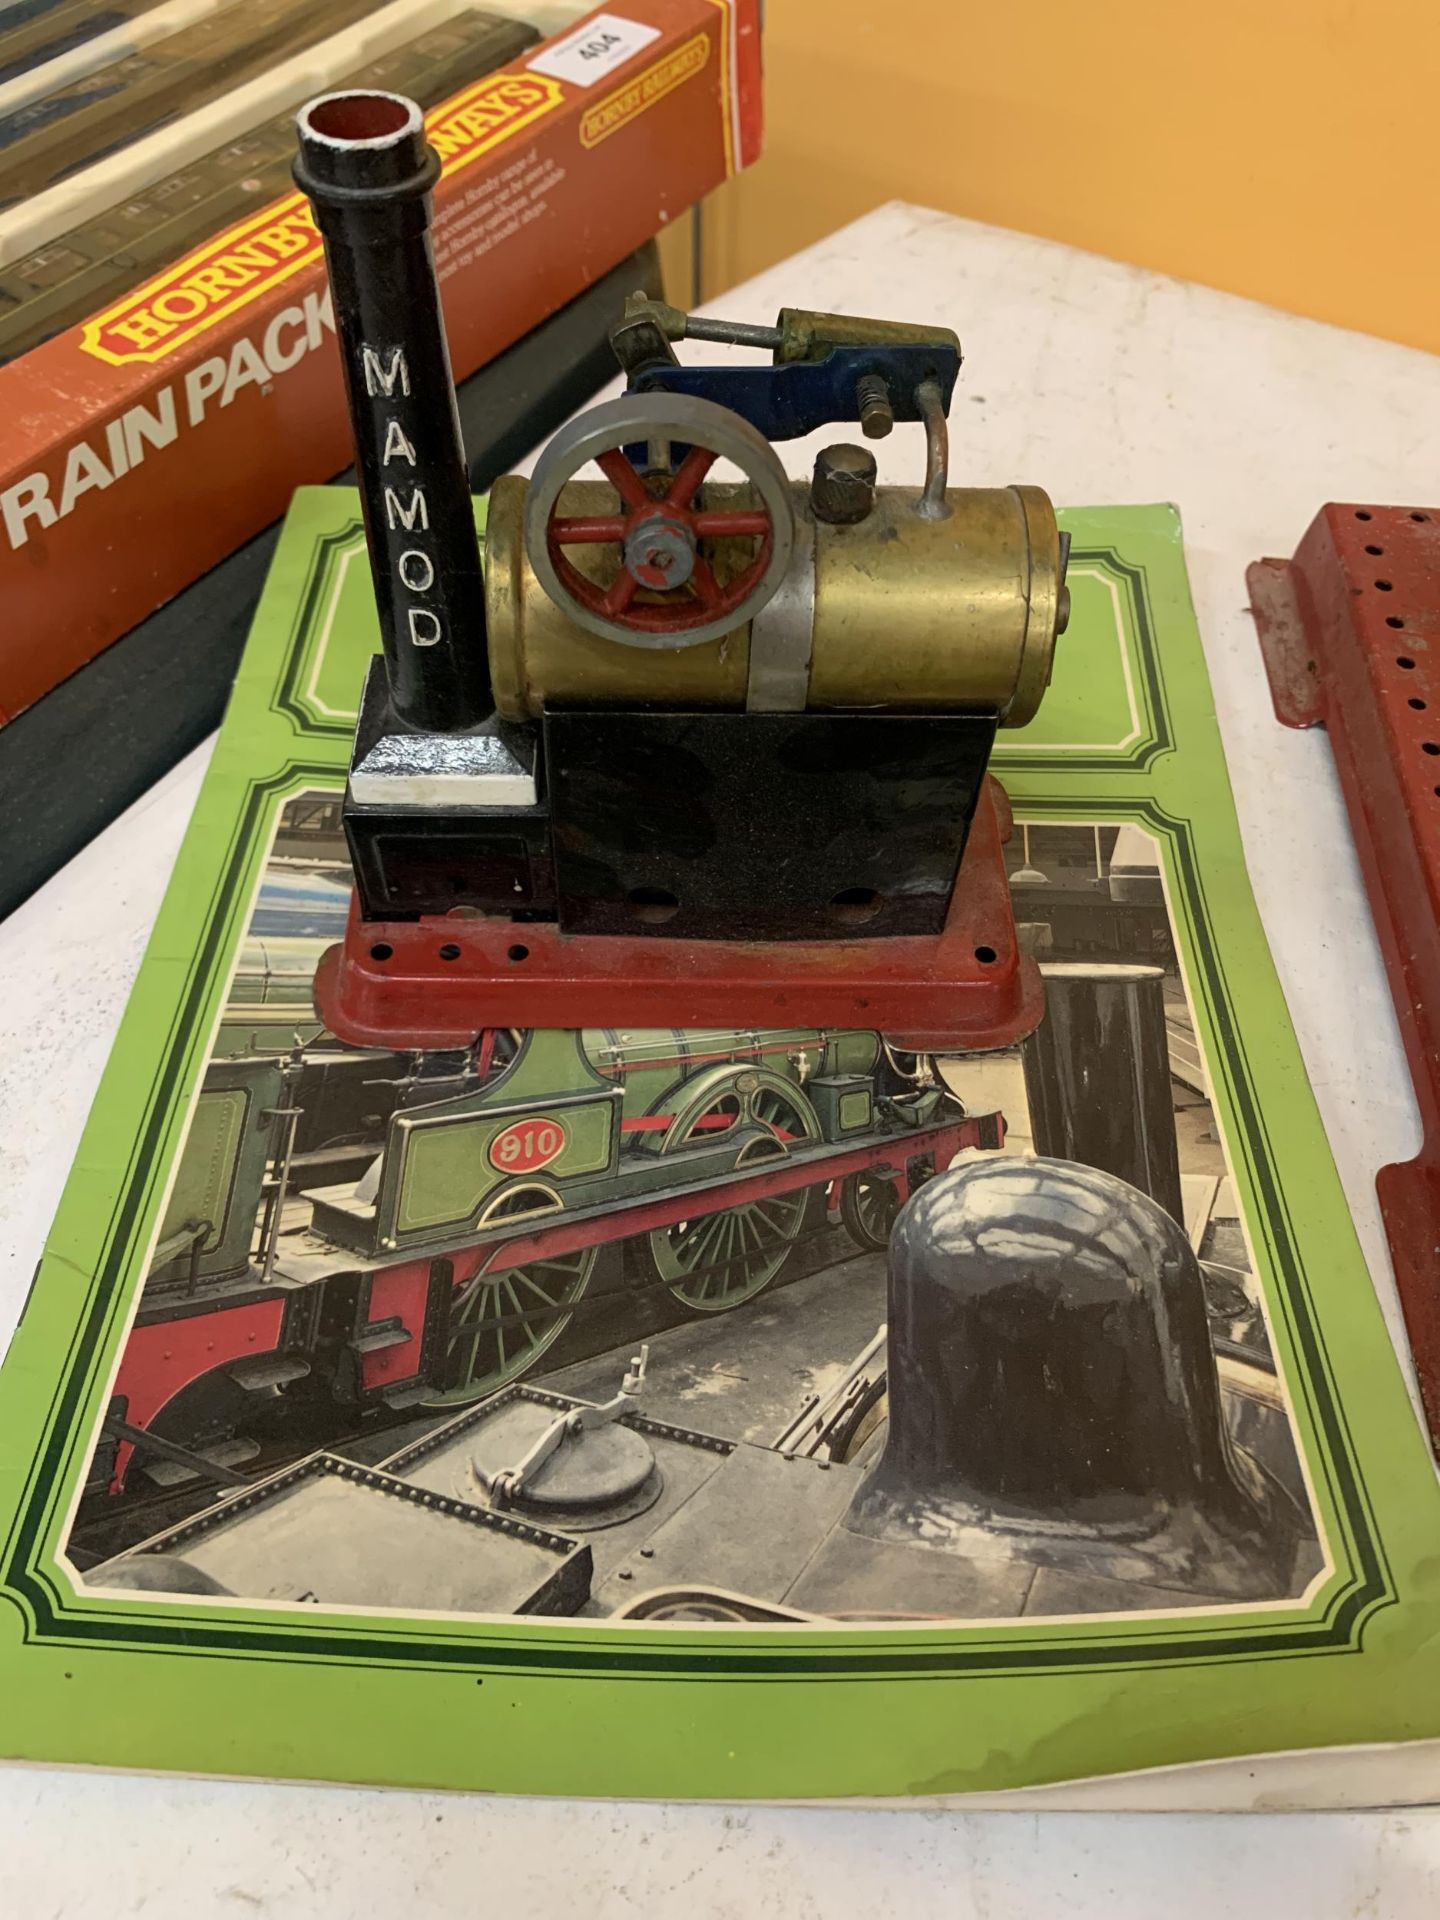 A MINIATURE MAMOD STEAM ENGINE AND A NATIONAL RAILWAY MUSEUM BOOK